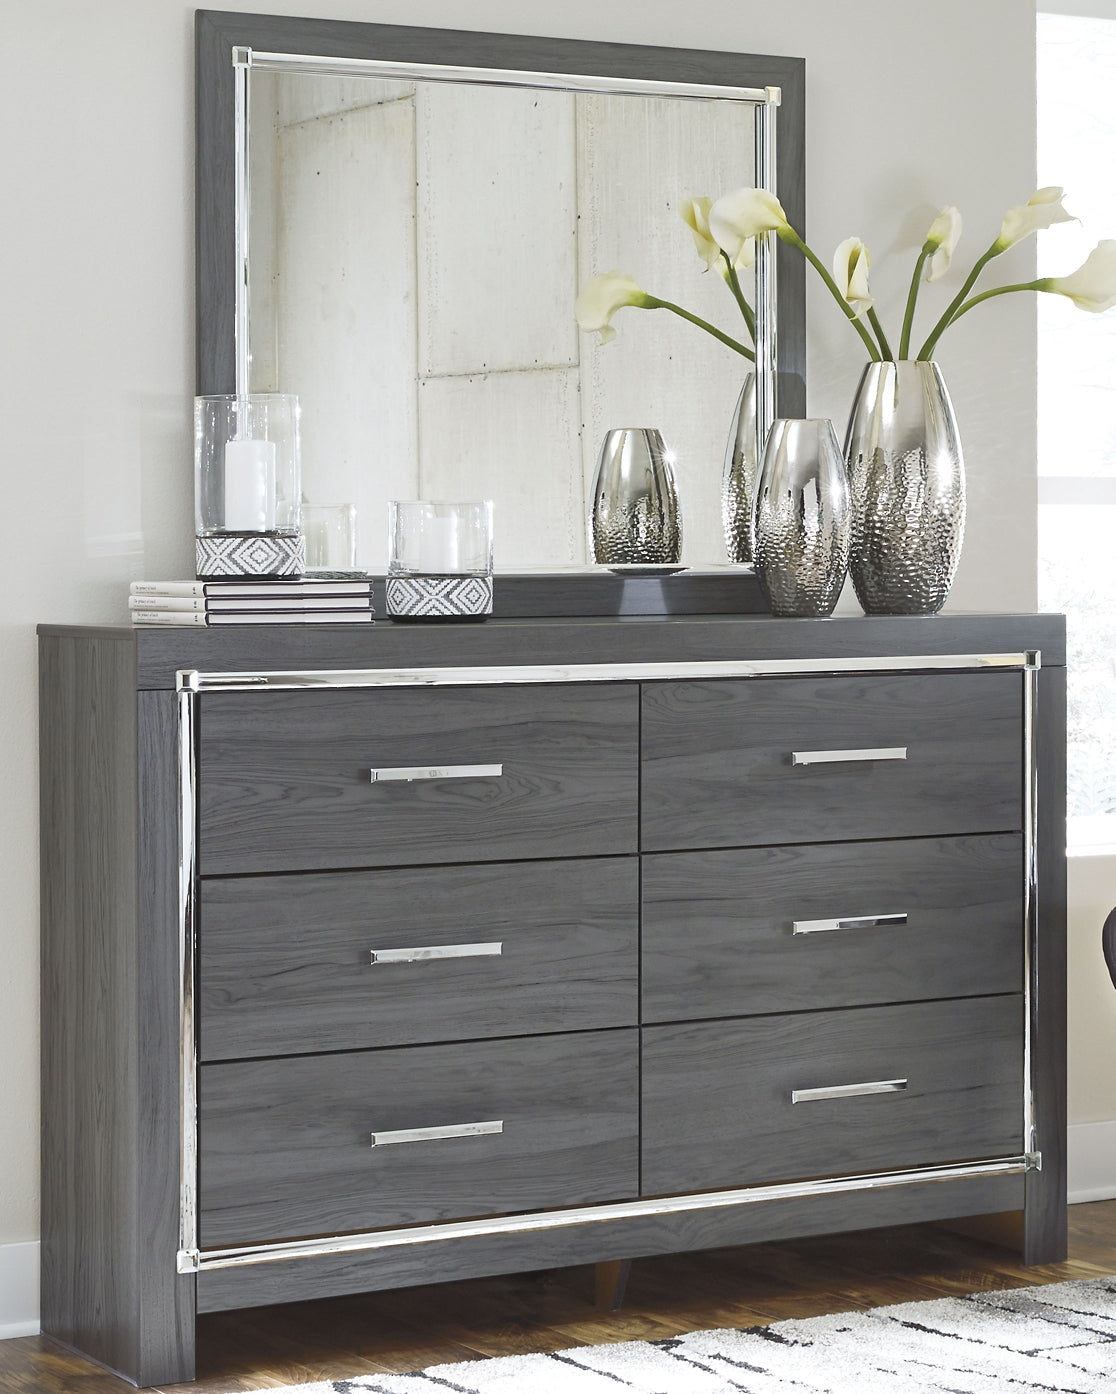 Lodanna Full Panel Bed with 2 Storage Drawers with Mirrored Dresser Signature Design by Ashley®